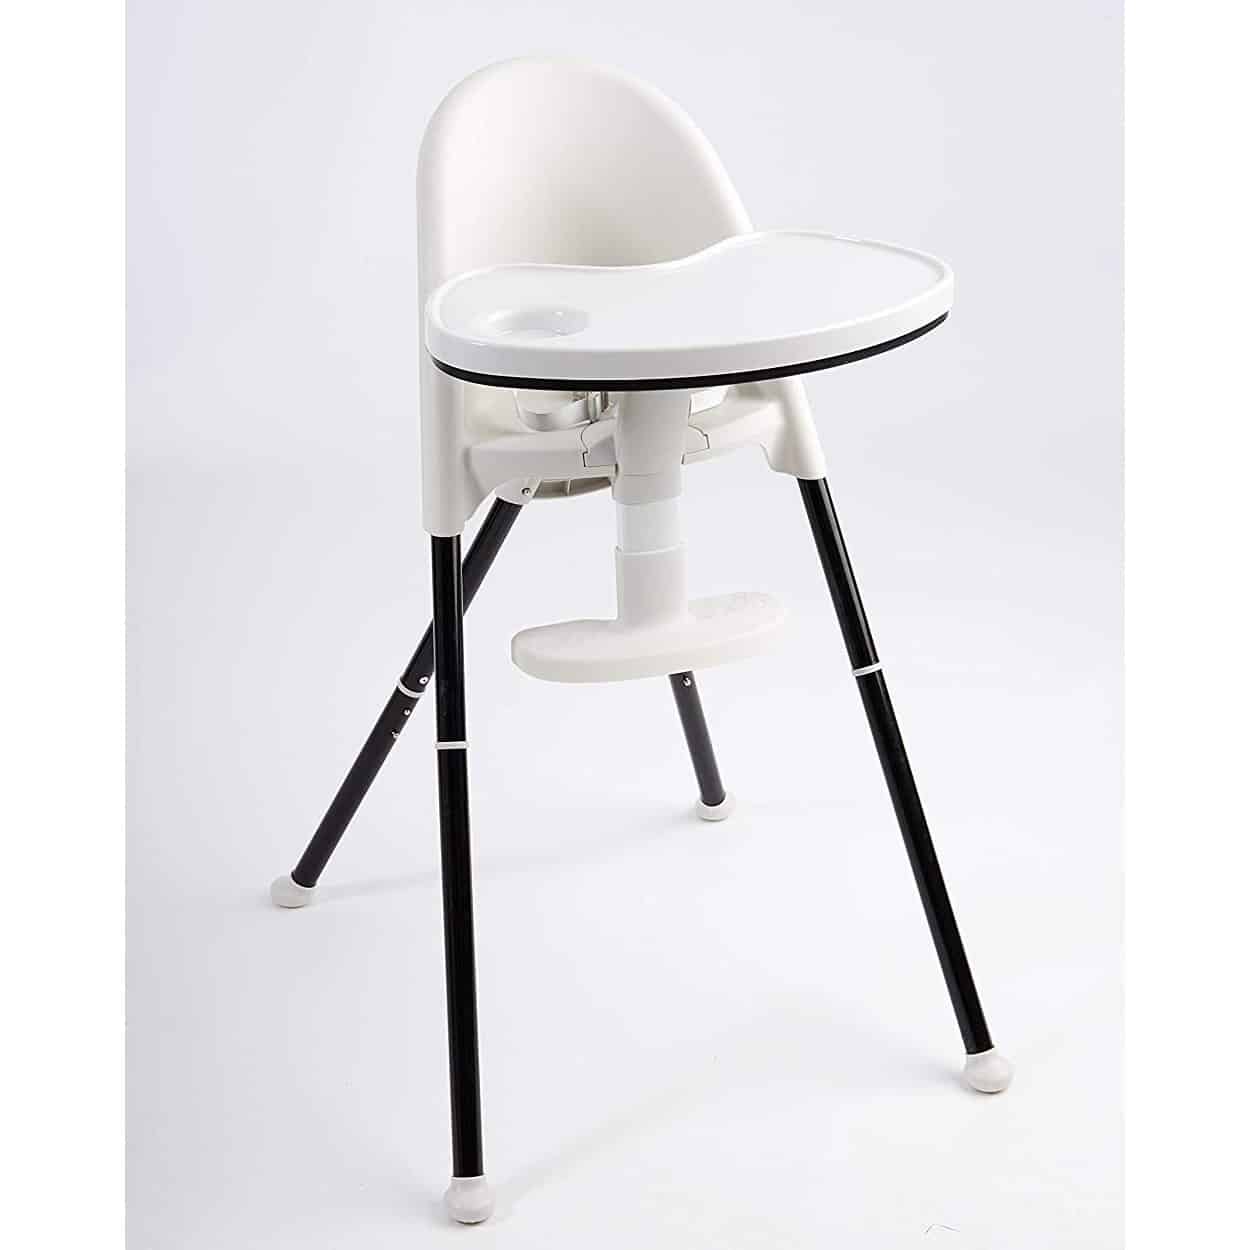 Top 10 Best Folding High Chairs in 2022 Reviews | Buying Guide